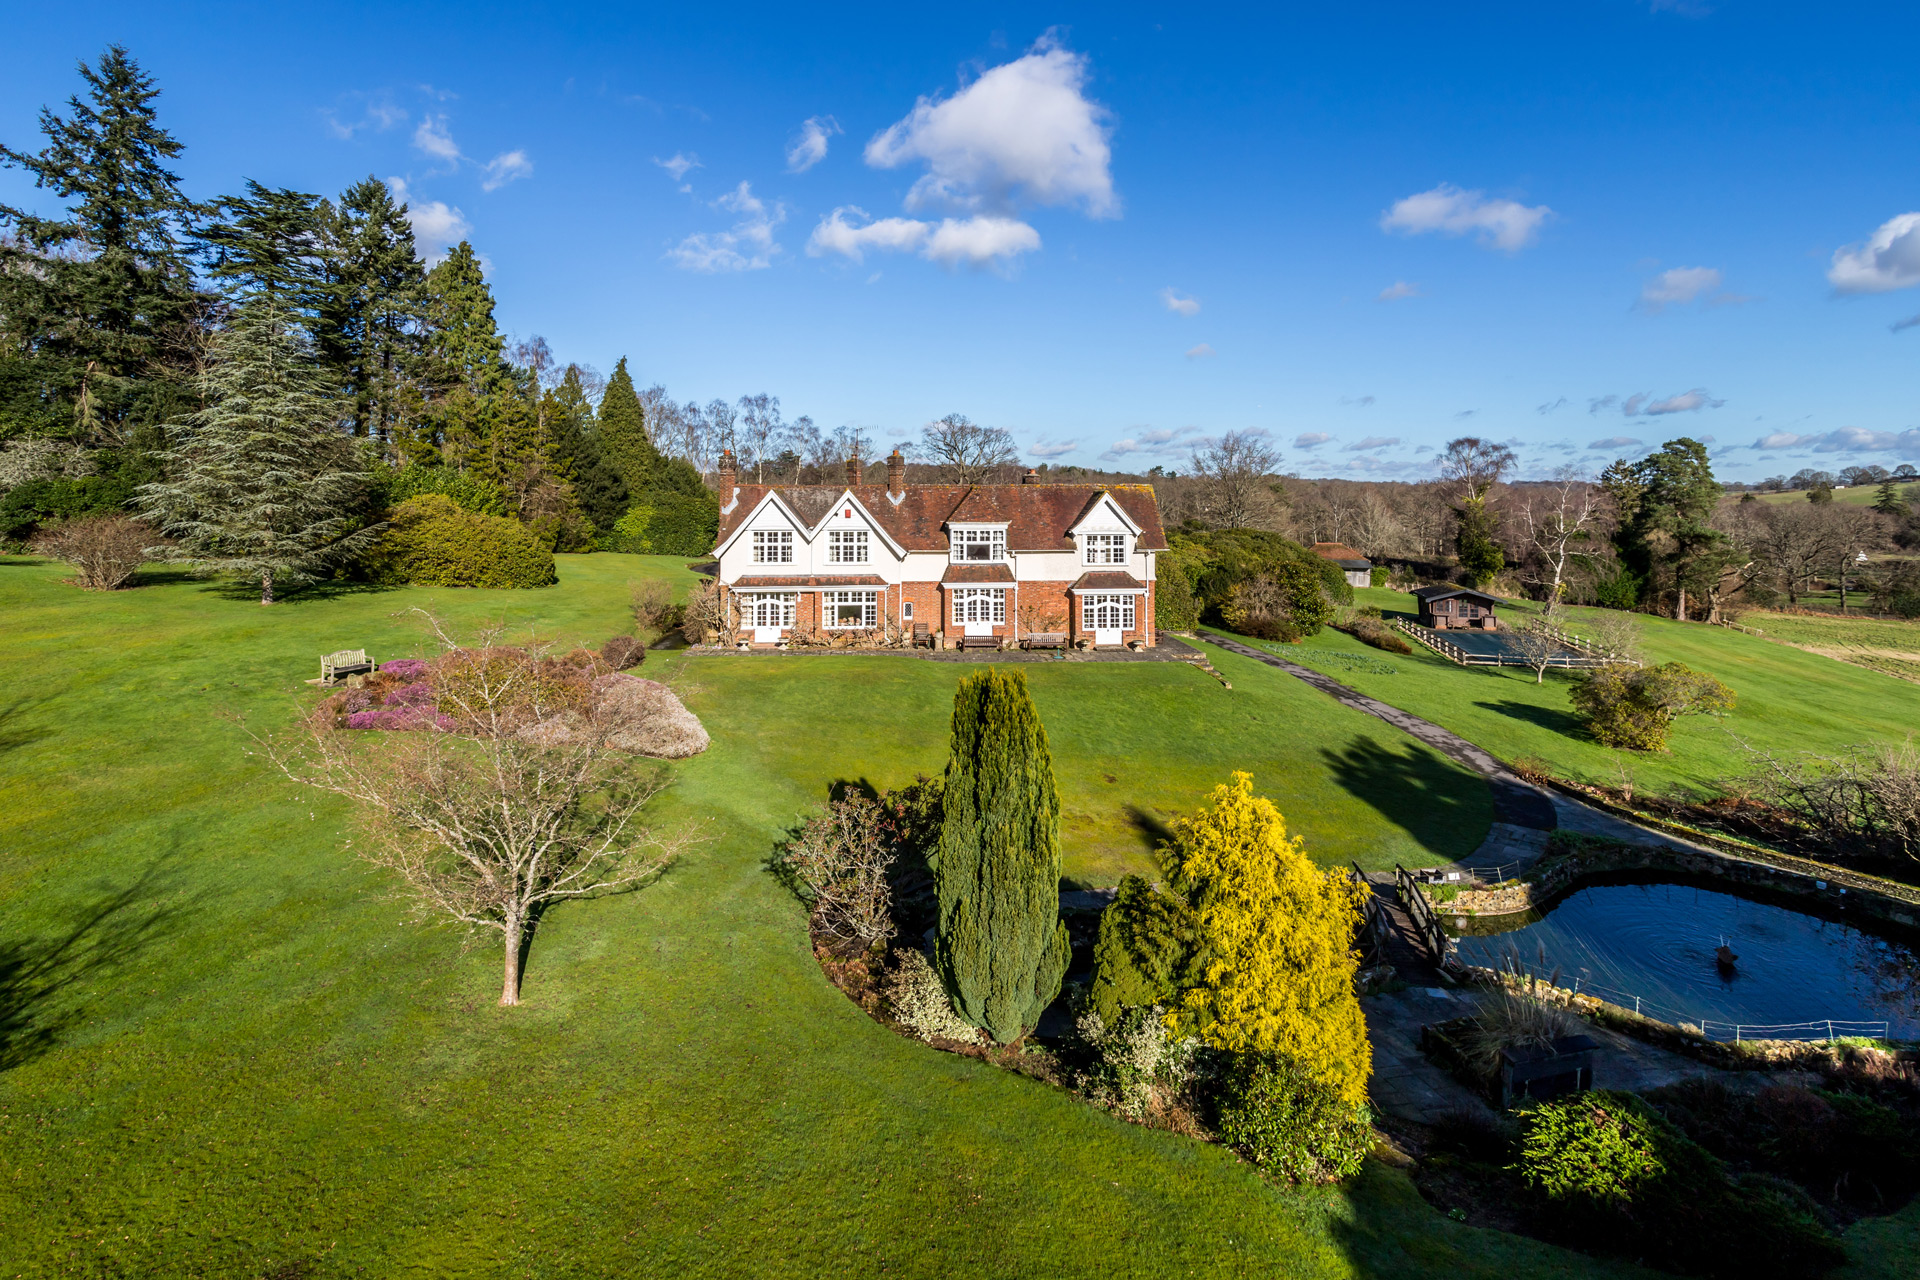 Aerial view of country house with grounds and a pond.